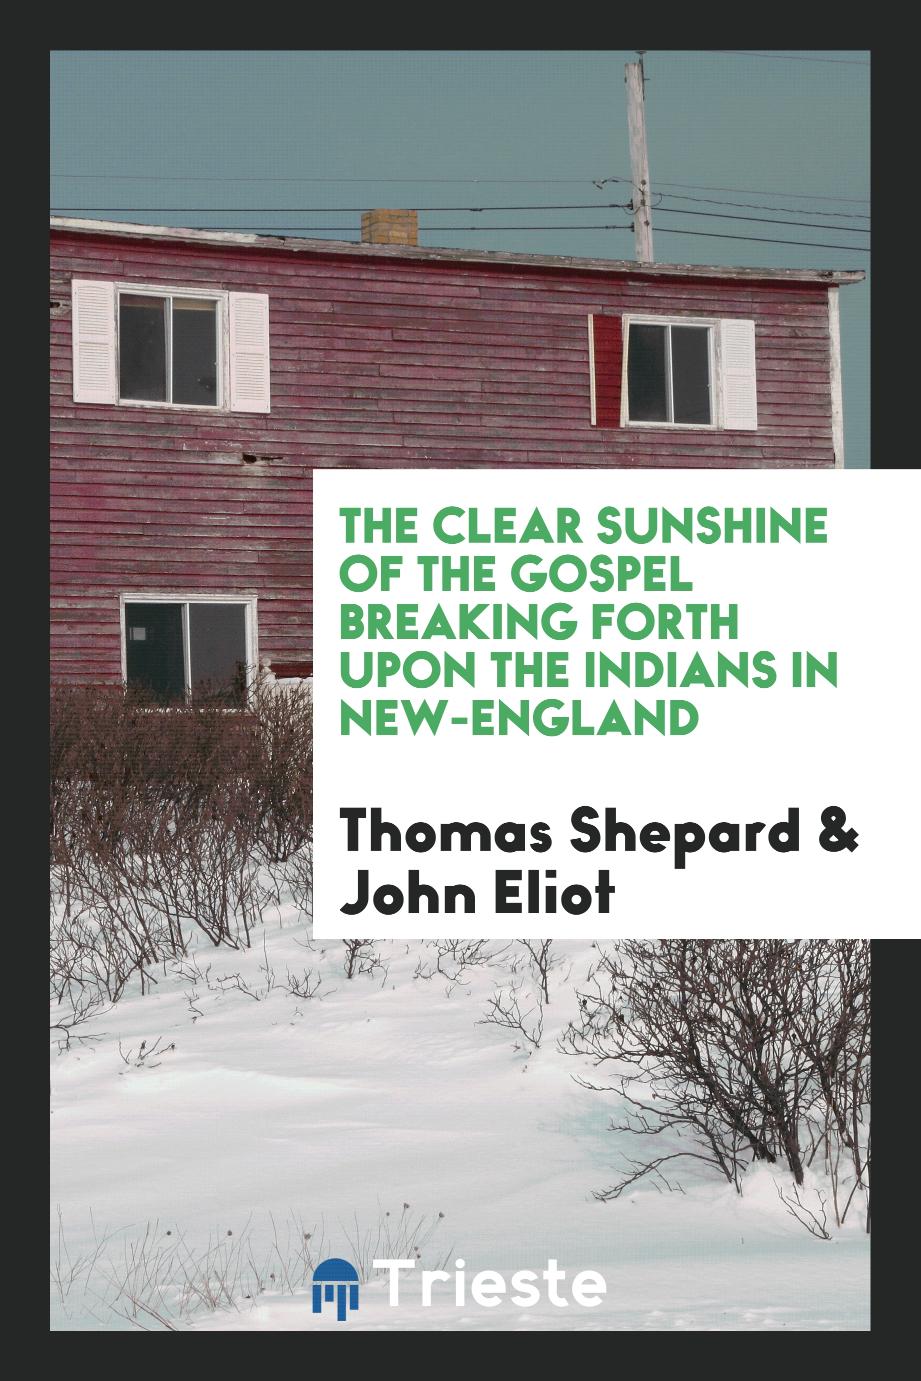 The clear sunshine of the gospel breaking forth upon the Indians in New-England